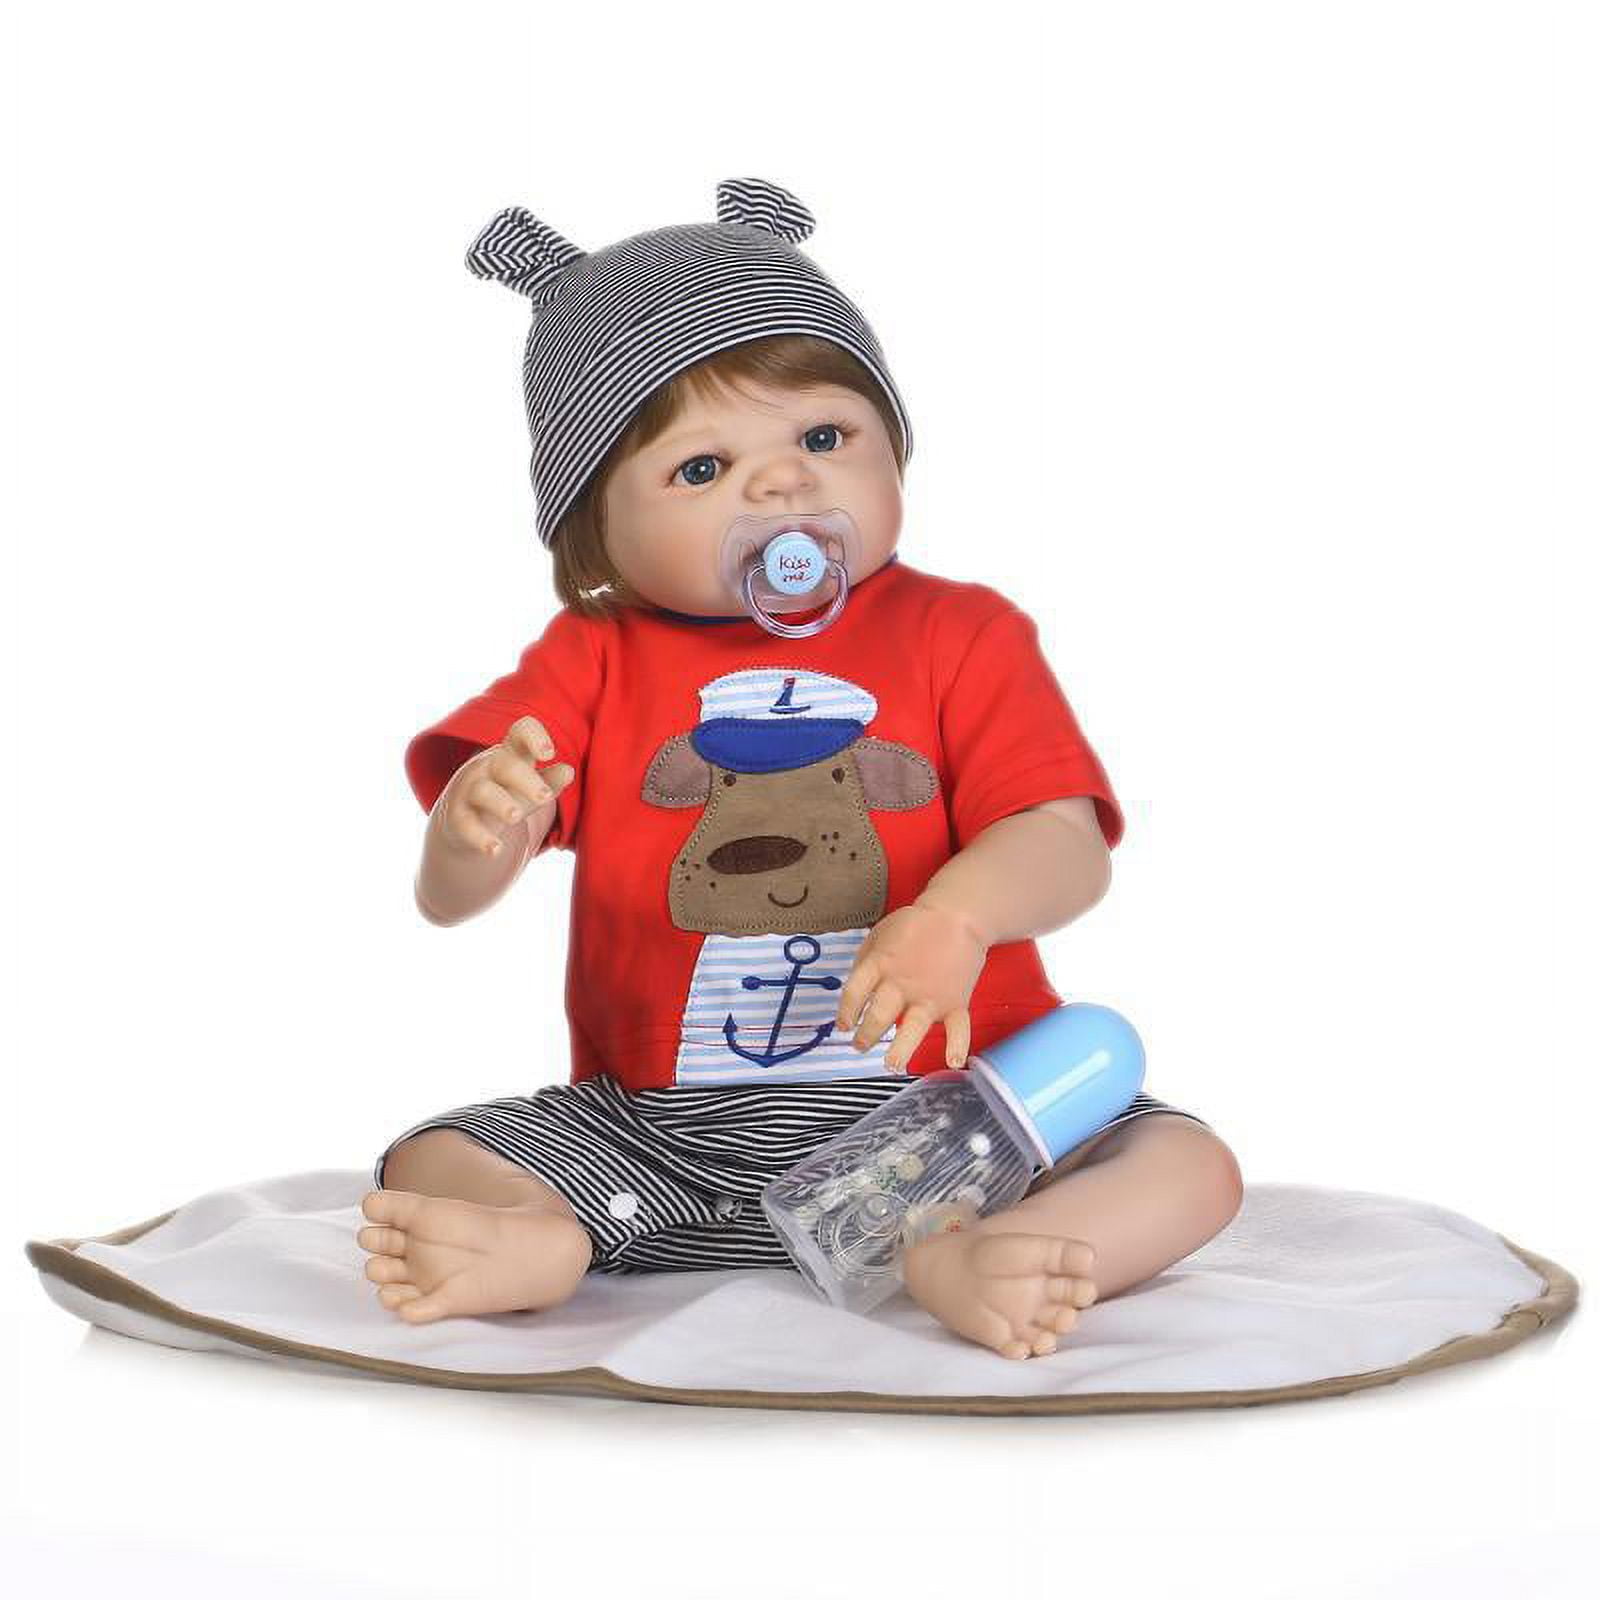 5pcs/lot Plastic Mini Magnifying Glass Children's Toys Learning Education  Toys  Lifelike Reborn Dolls for Sale❤️Cheap Realistic Silicone Newborn  Baby Doll